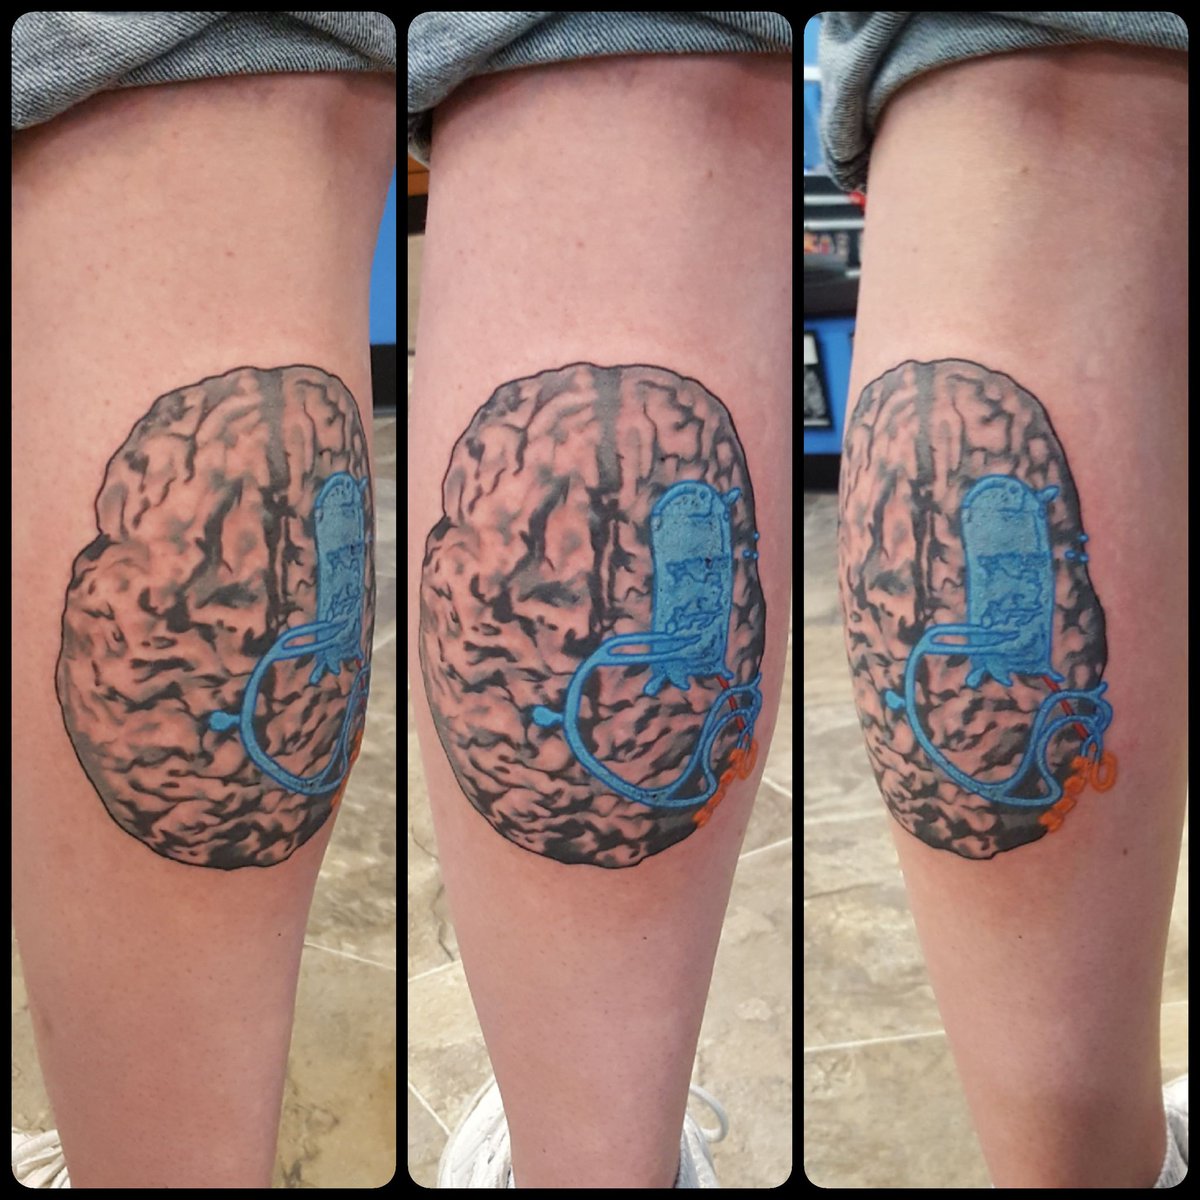 37 Great Epilepsy Tattoos Ideas and Design for Balance  Psycho Tats